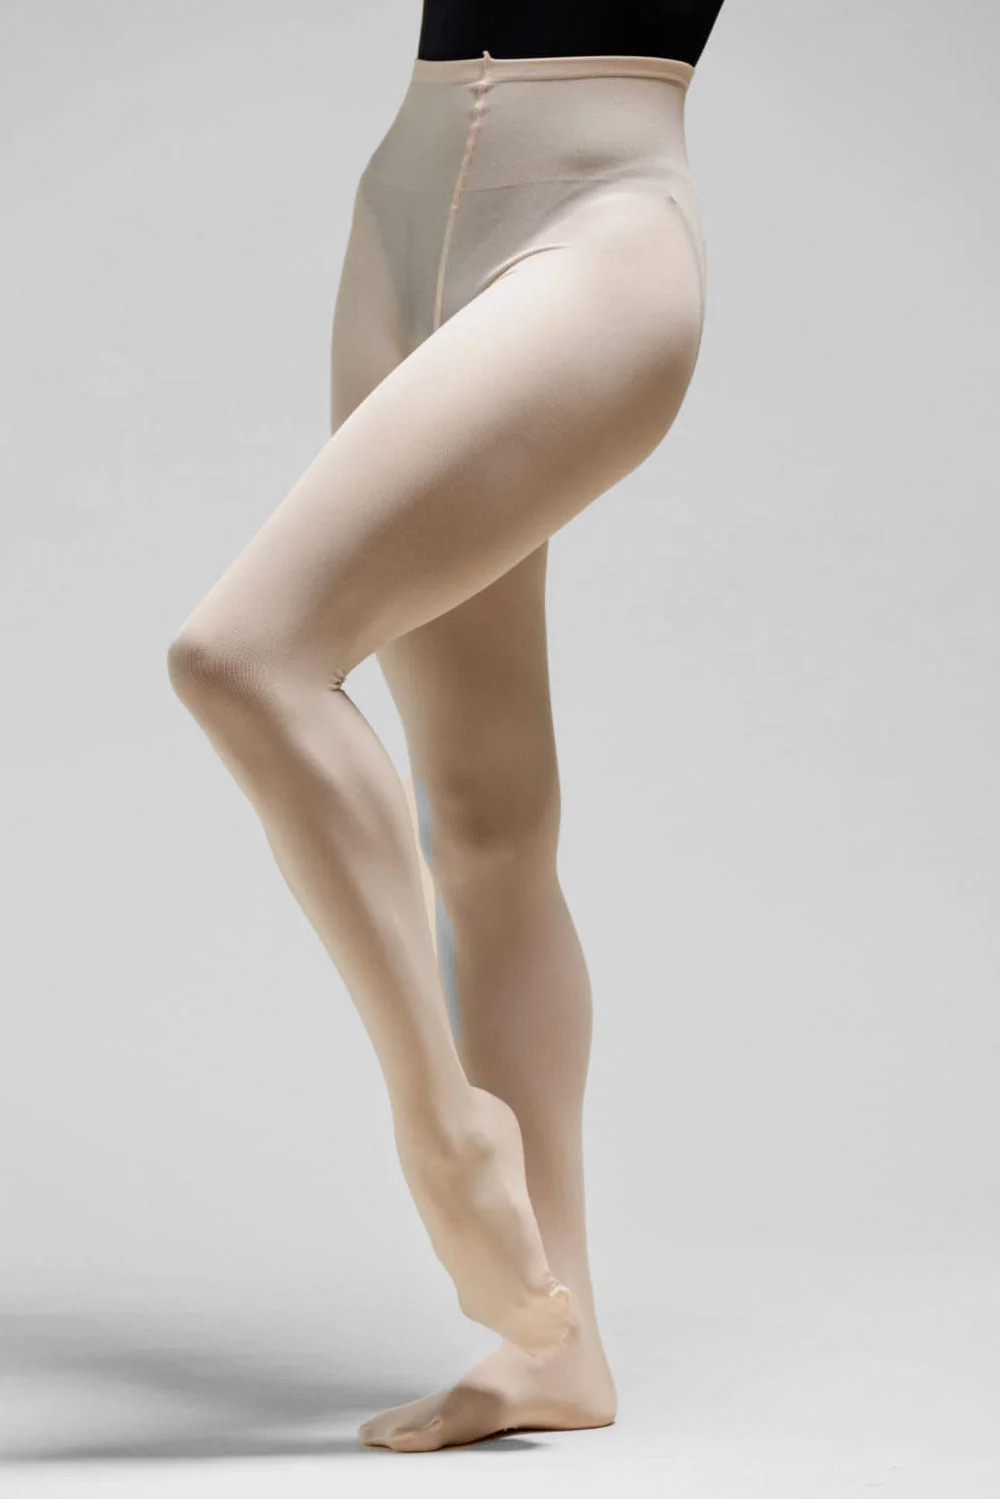 tights over leotard all day every day #fyp #ballerina #dancer #pointes